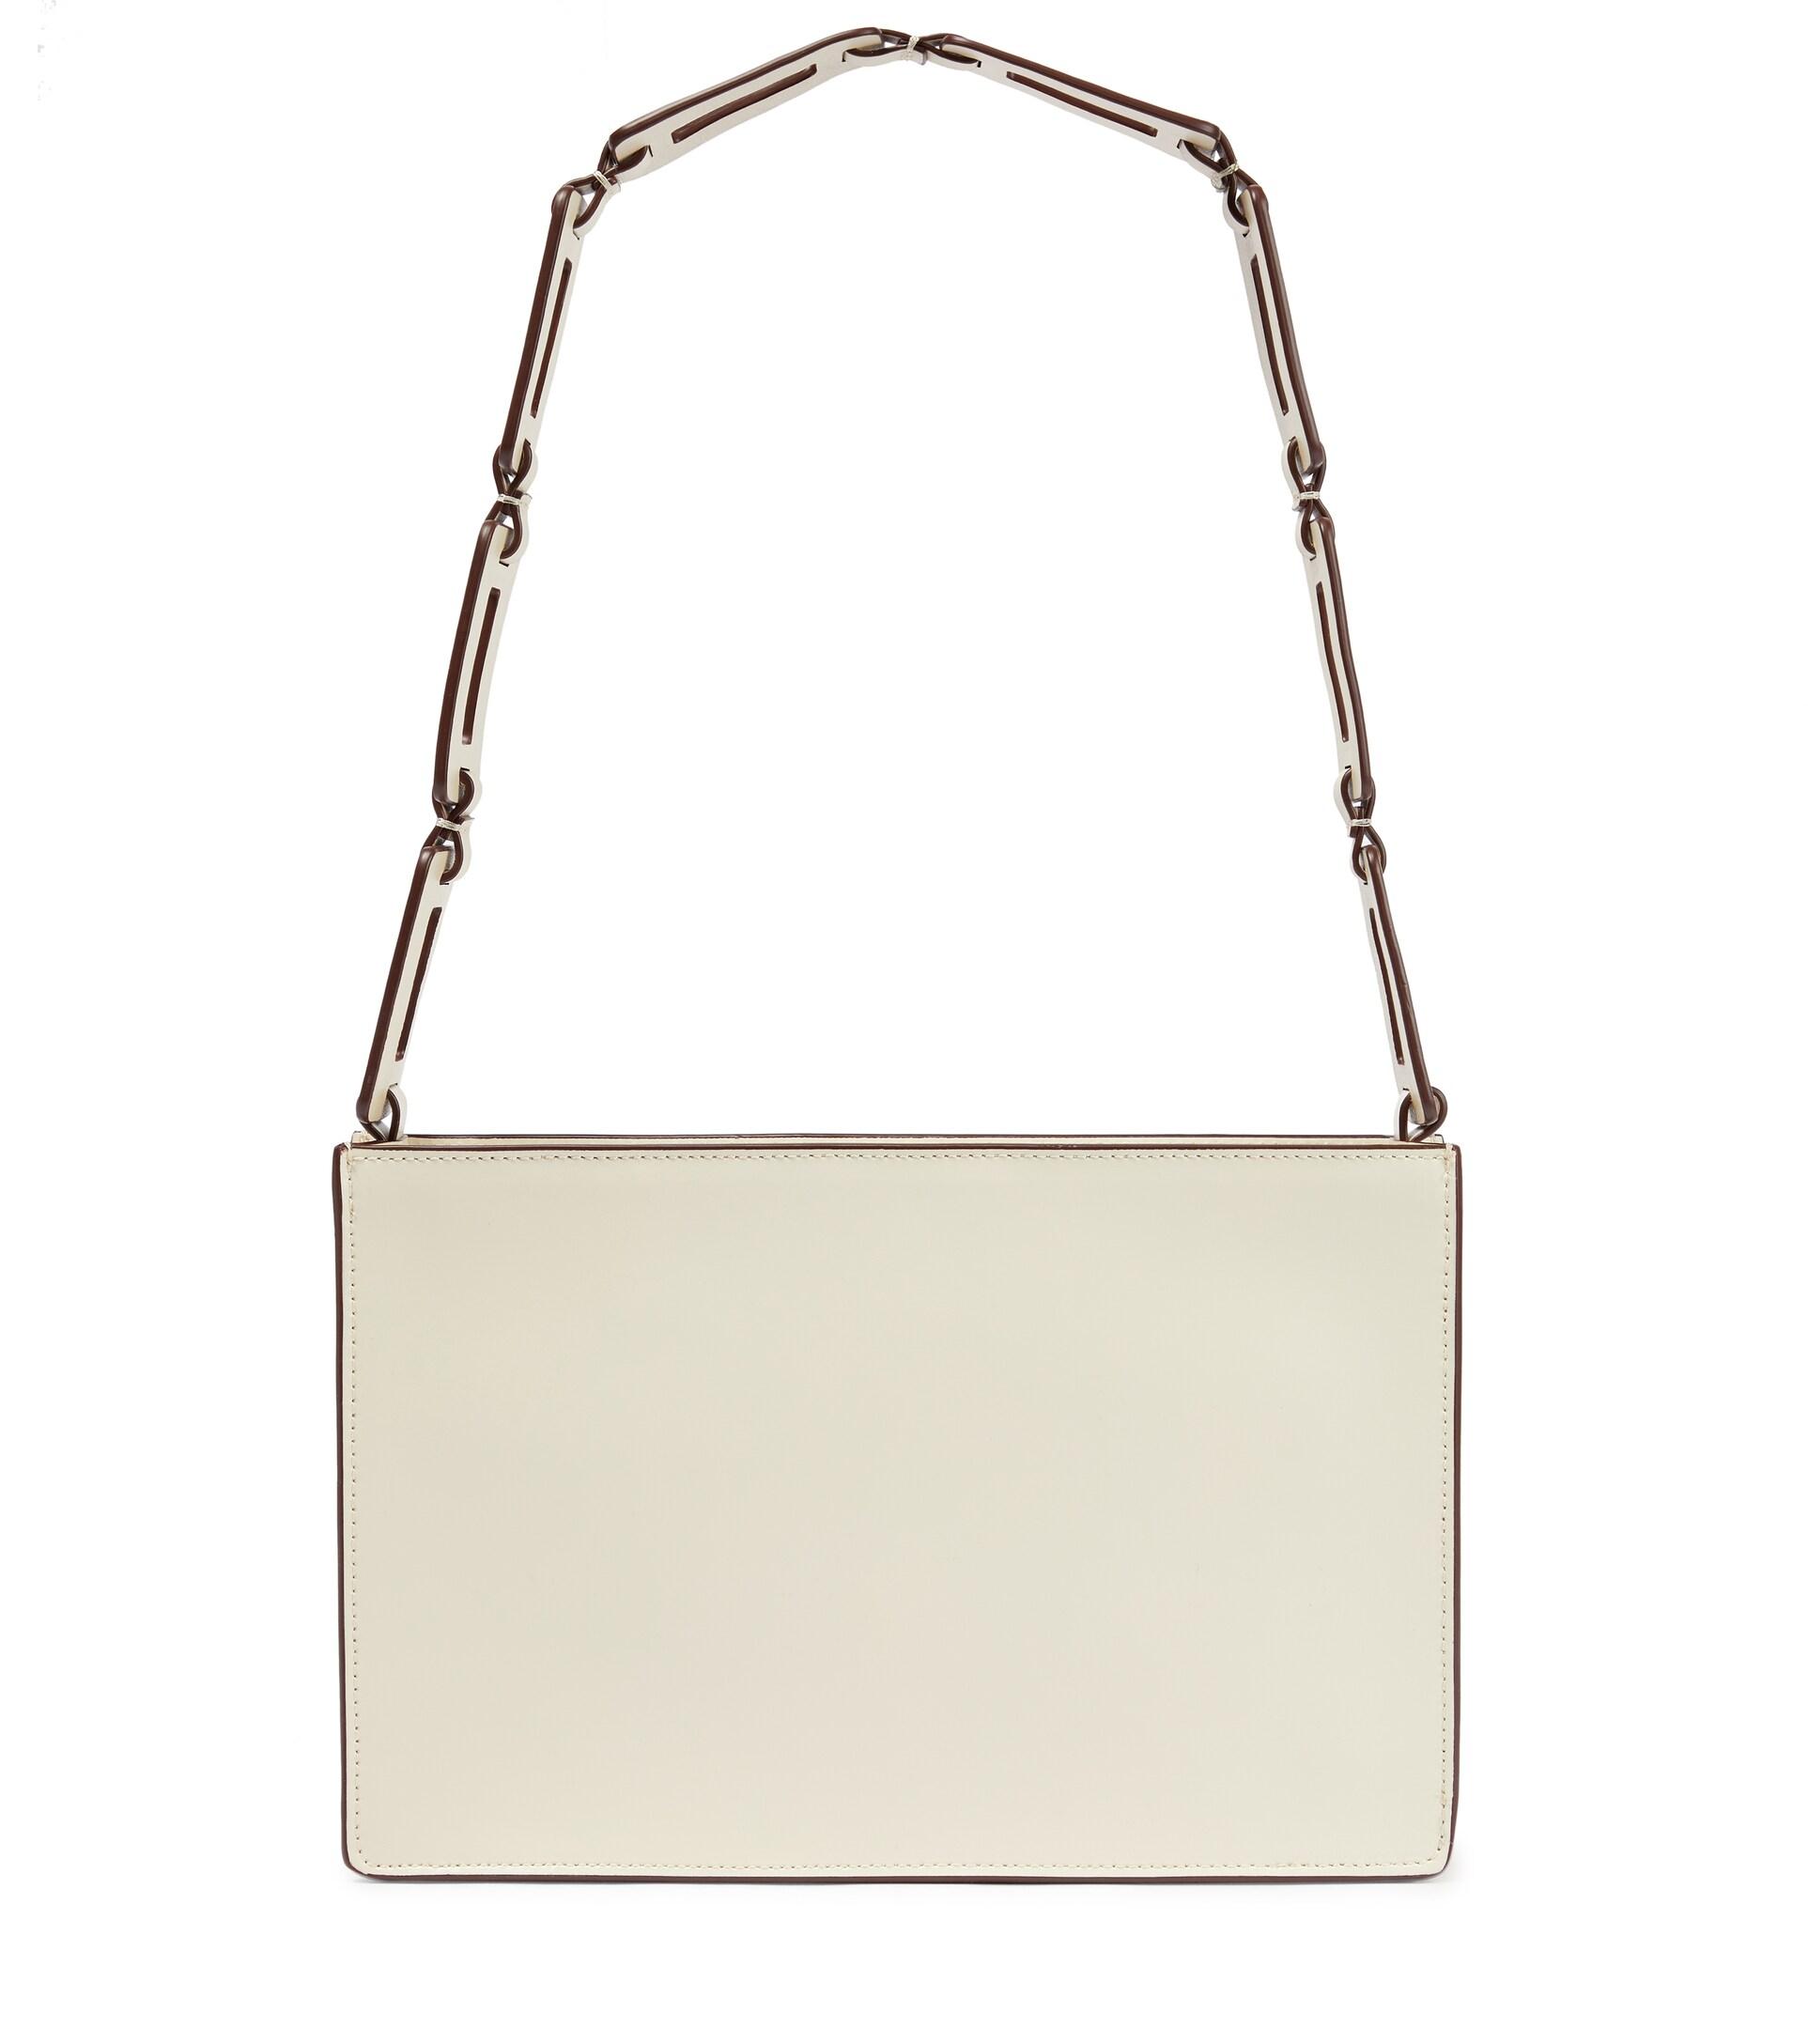 STAUD Yas Leather Shoulder Bag in Cream (Natural) | Lyst